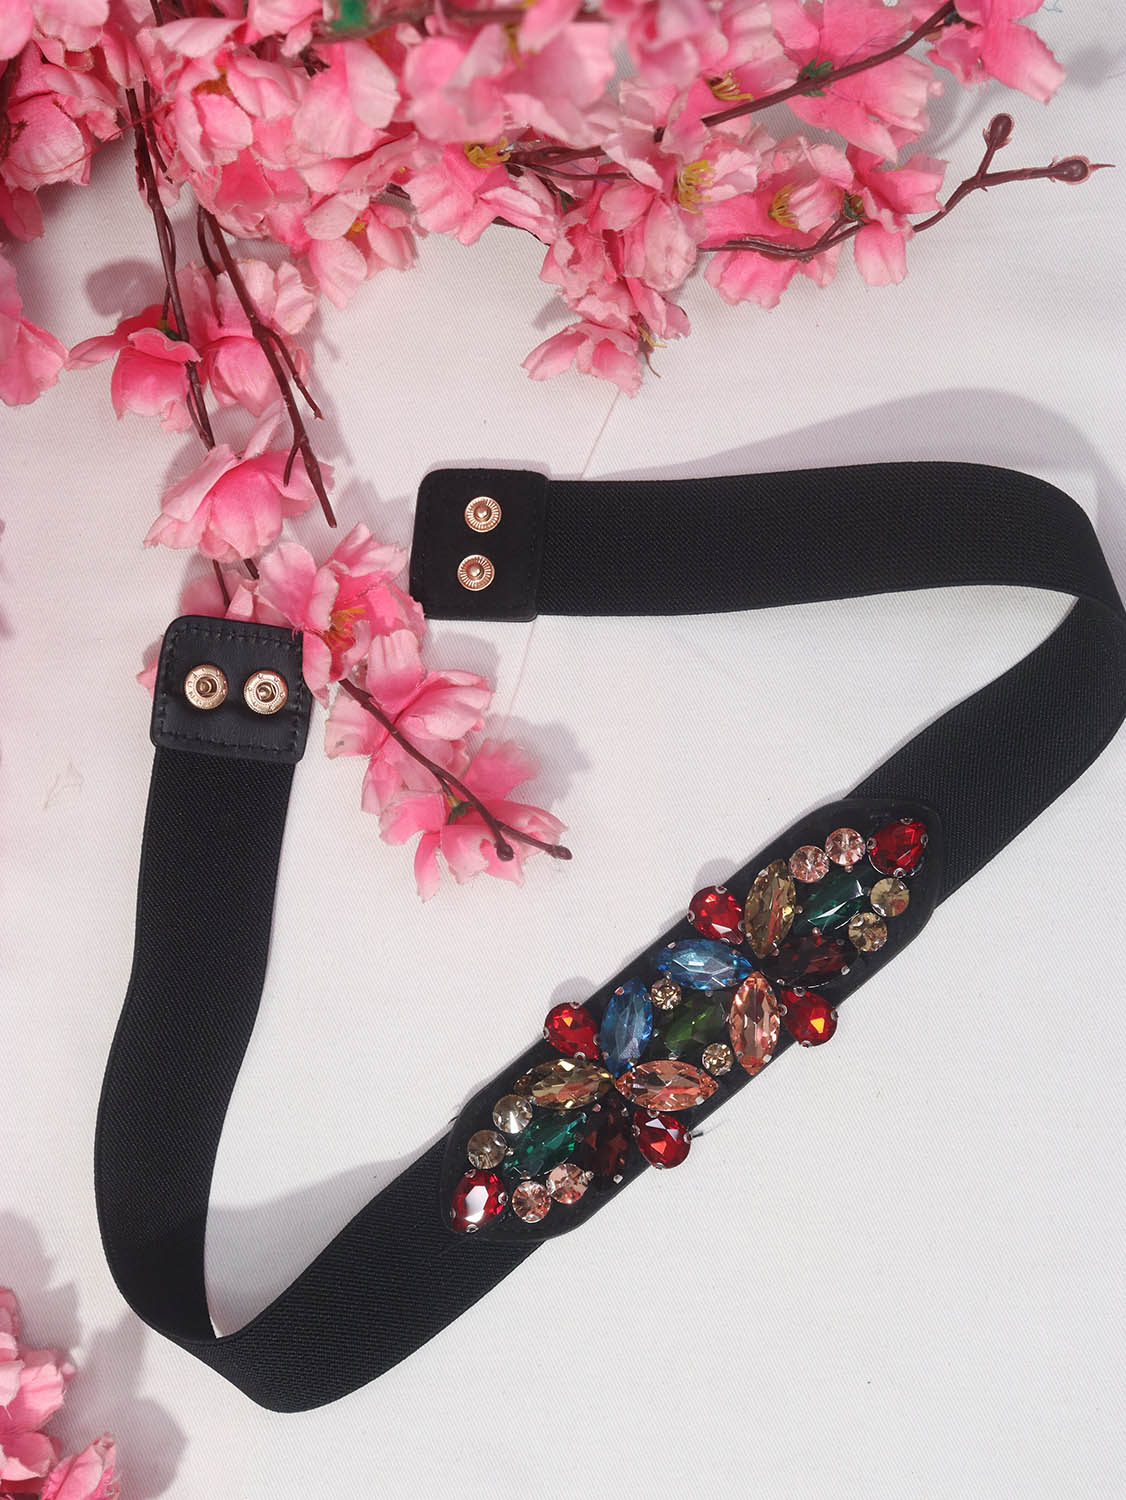 Upgrade Your Style with Blackout Buckle-Up Belts - Shop Now!